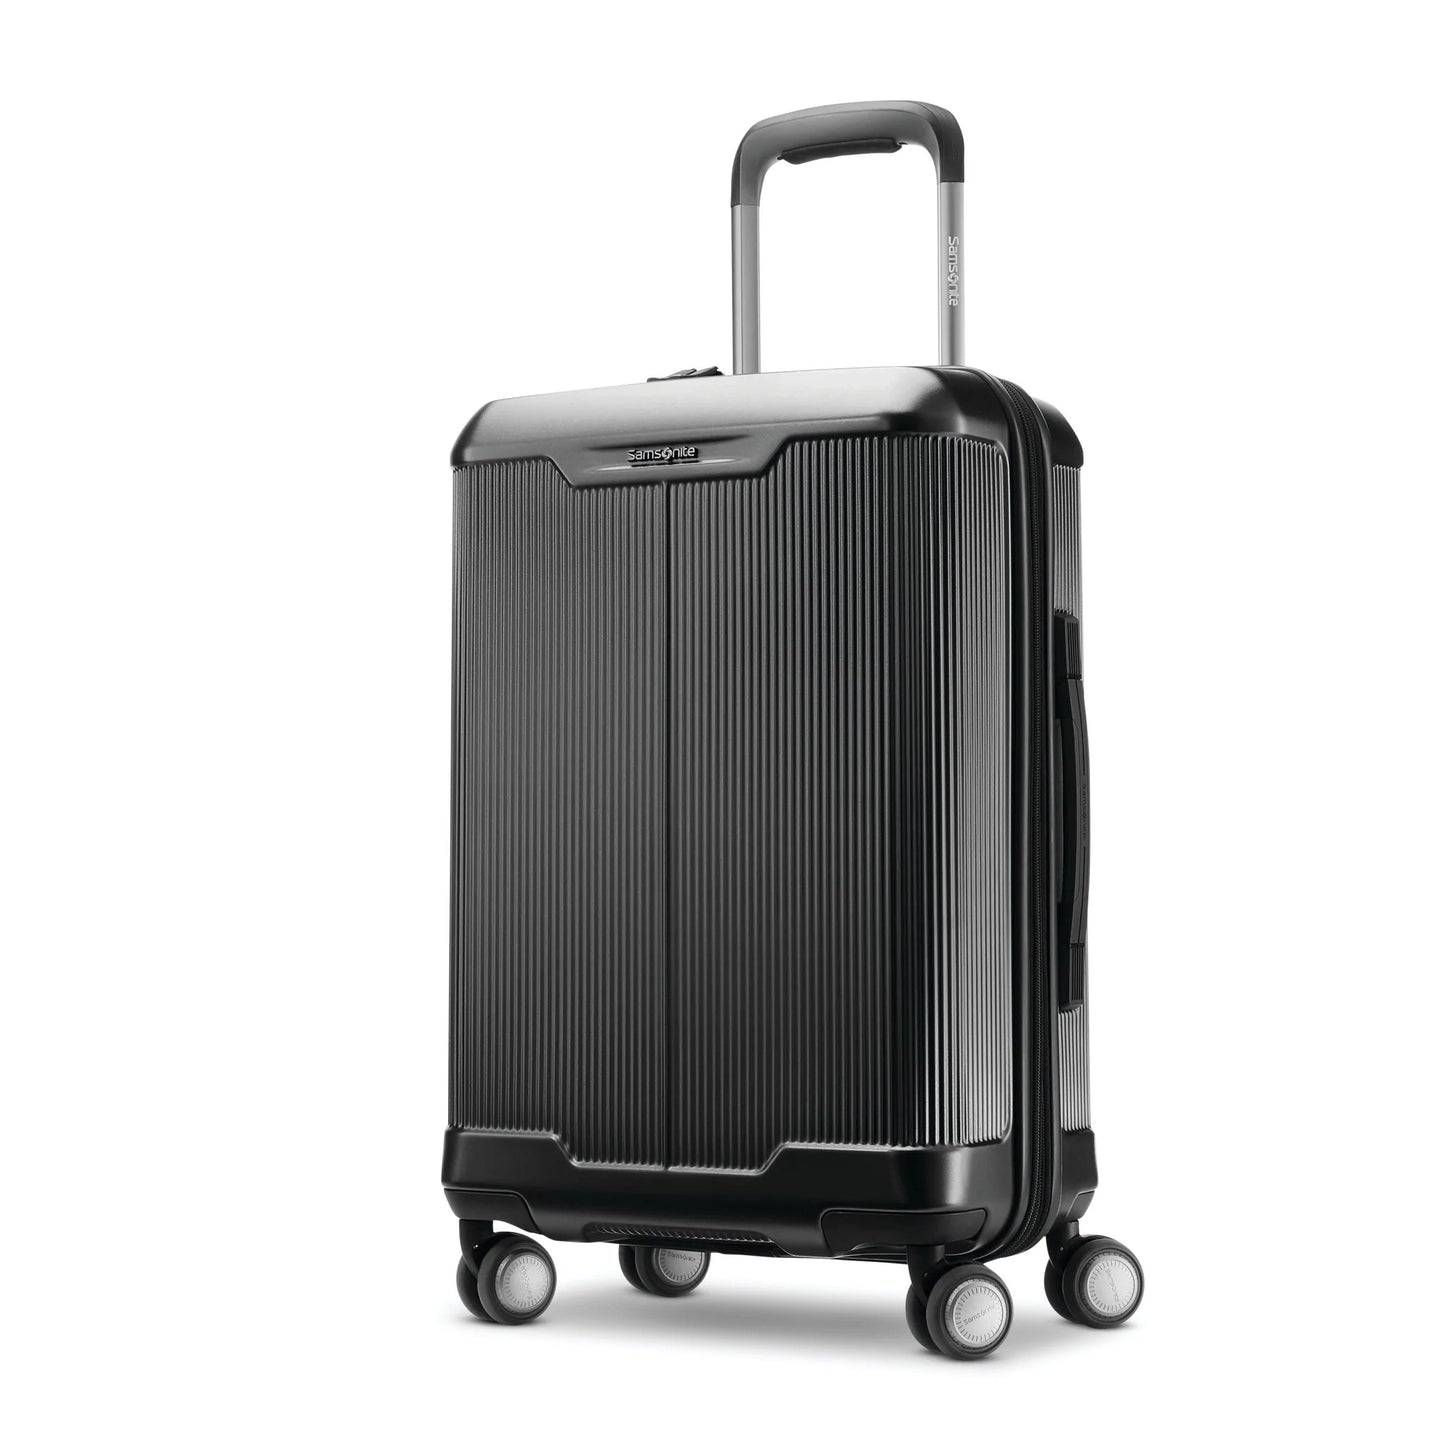 On Sale - Samsonite Silhouette Carry-On Hardsided Expandable Spinner with FlexPack Packing System